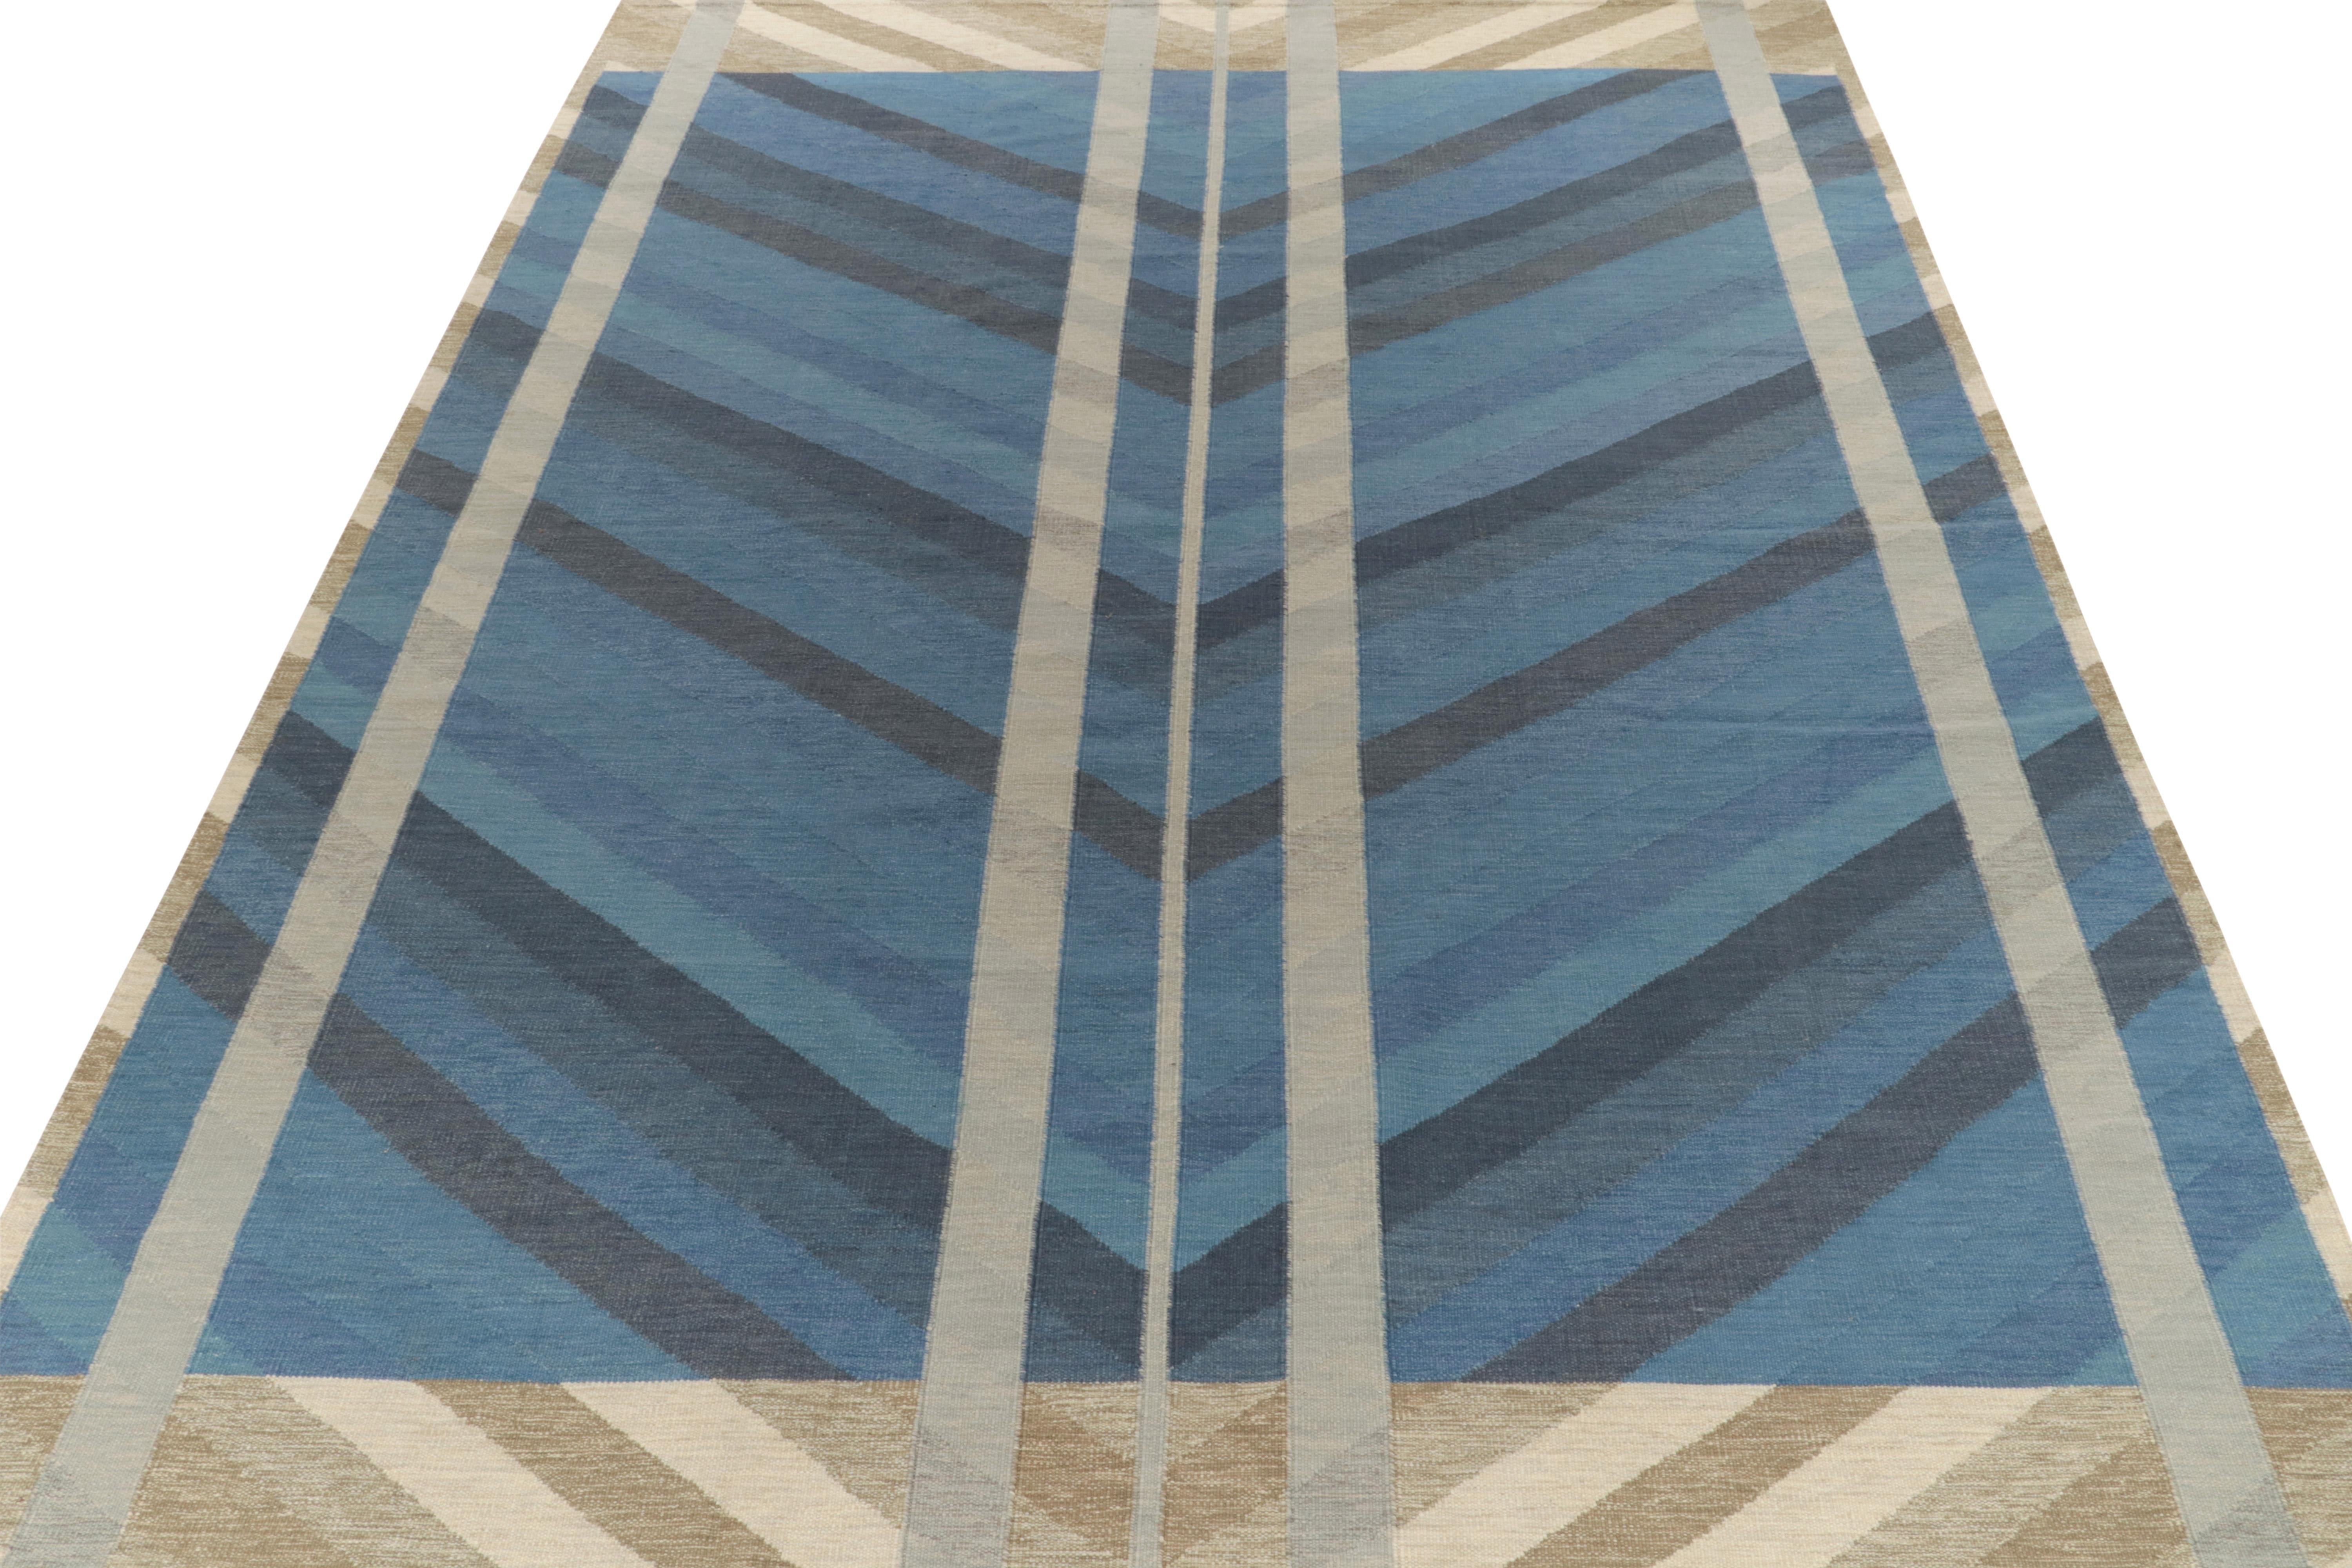 From our celebrated flat weave texture of the acclaimed collection, a 13x17 Scandinavian style kilim rug showcasing movement & symmetry. Handwoven in wool, the crisp striations embody the smartness lent by tones of blue, beige, brown & gray for a